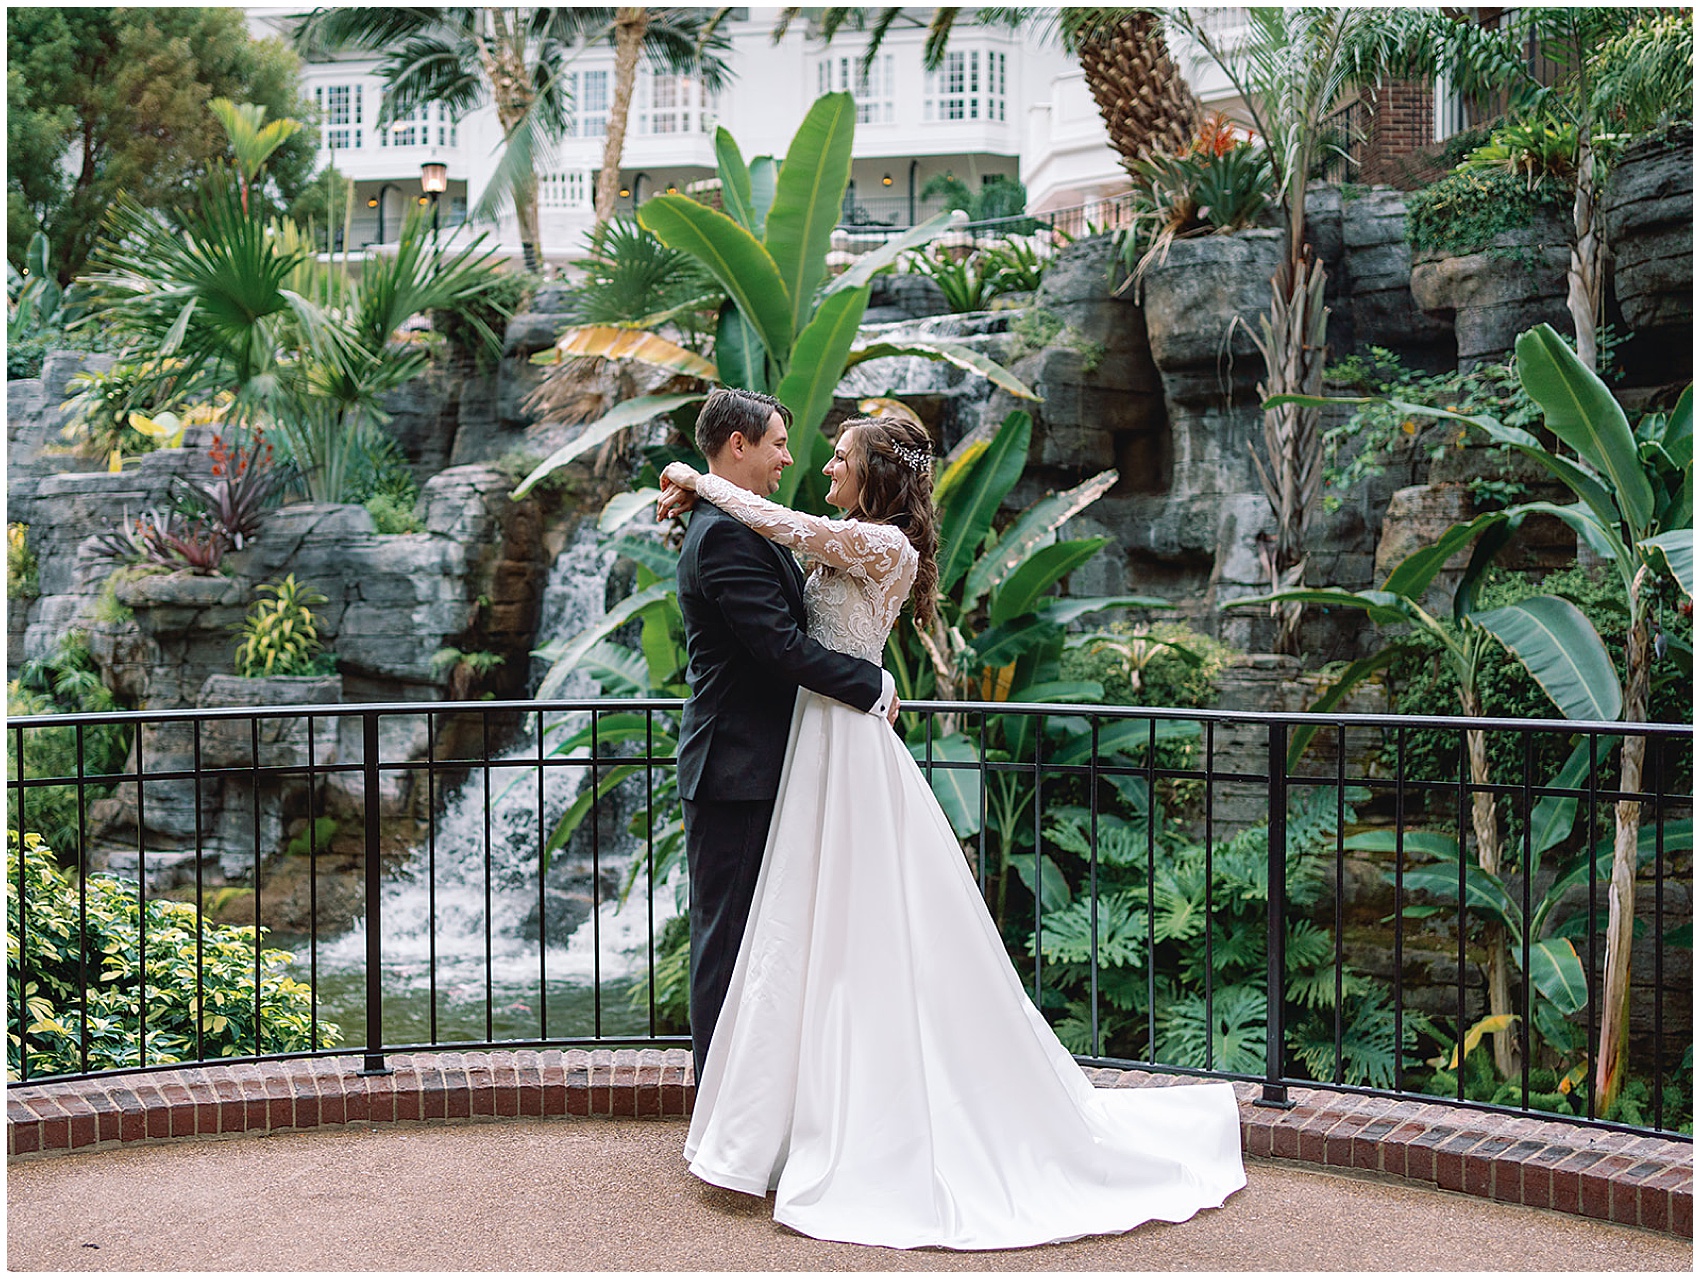 Newlyweds smile at each other while hugging in a tropical garden